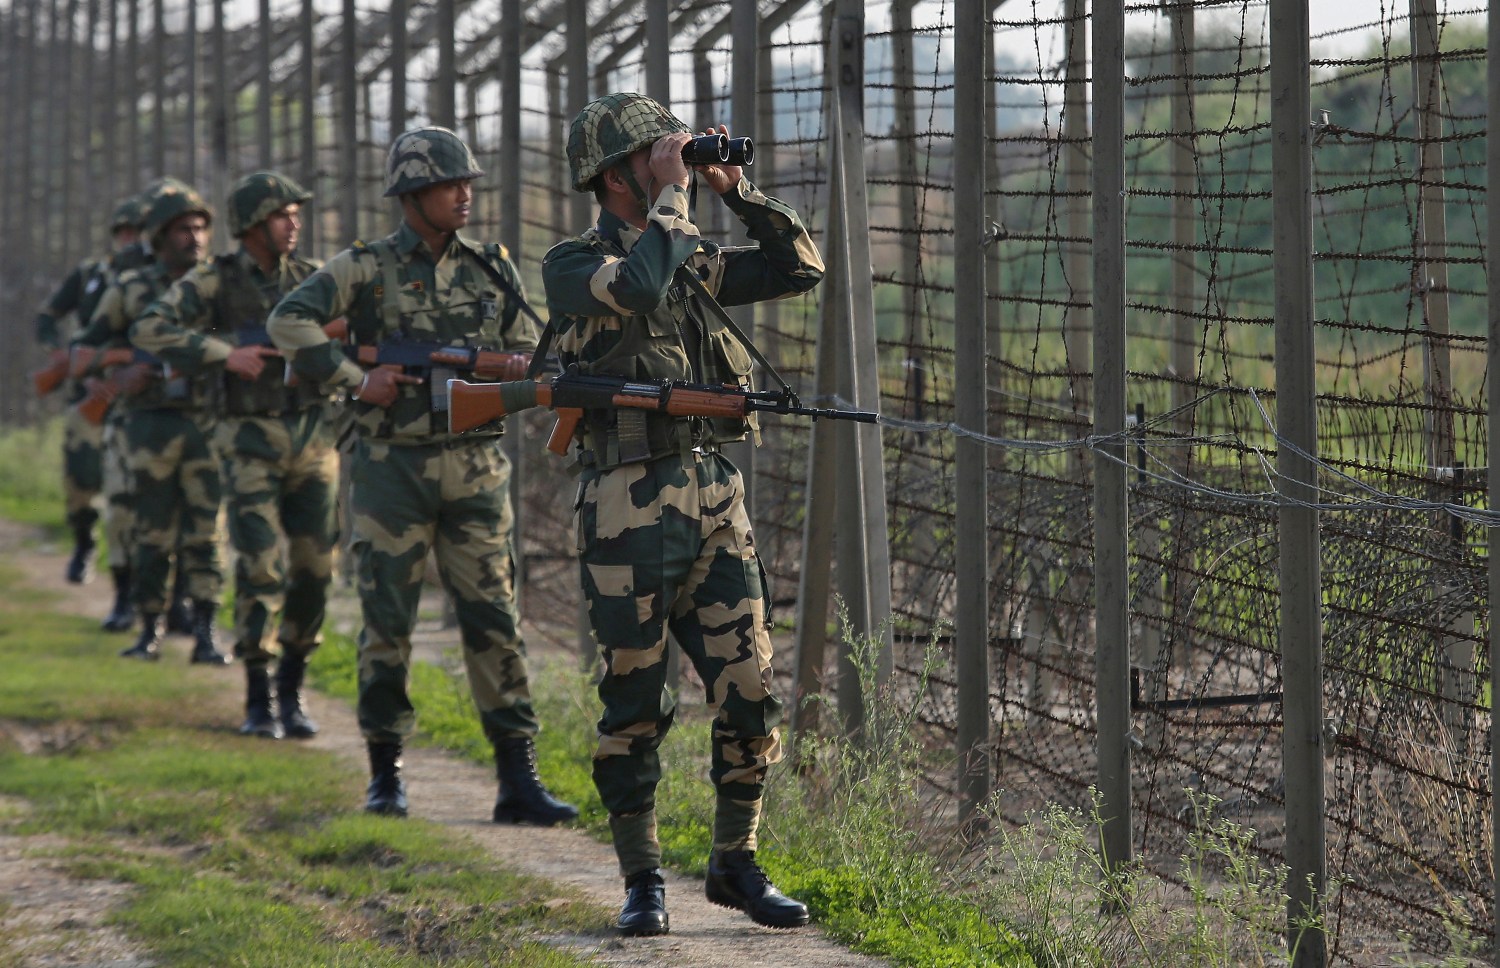 India's Border Security Force (BSF) soldiers patrol along the fenced border with Pakistan in Ranbir Singh Pura sector near Jammu February 26, 2019. REUTERS/Mukesh Gupta - RC1F4D99BF00